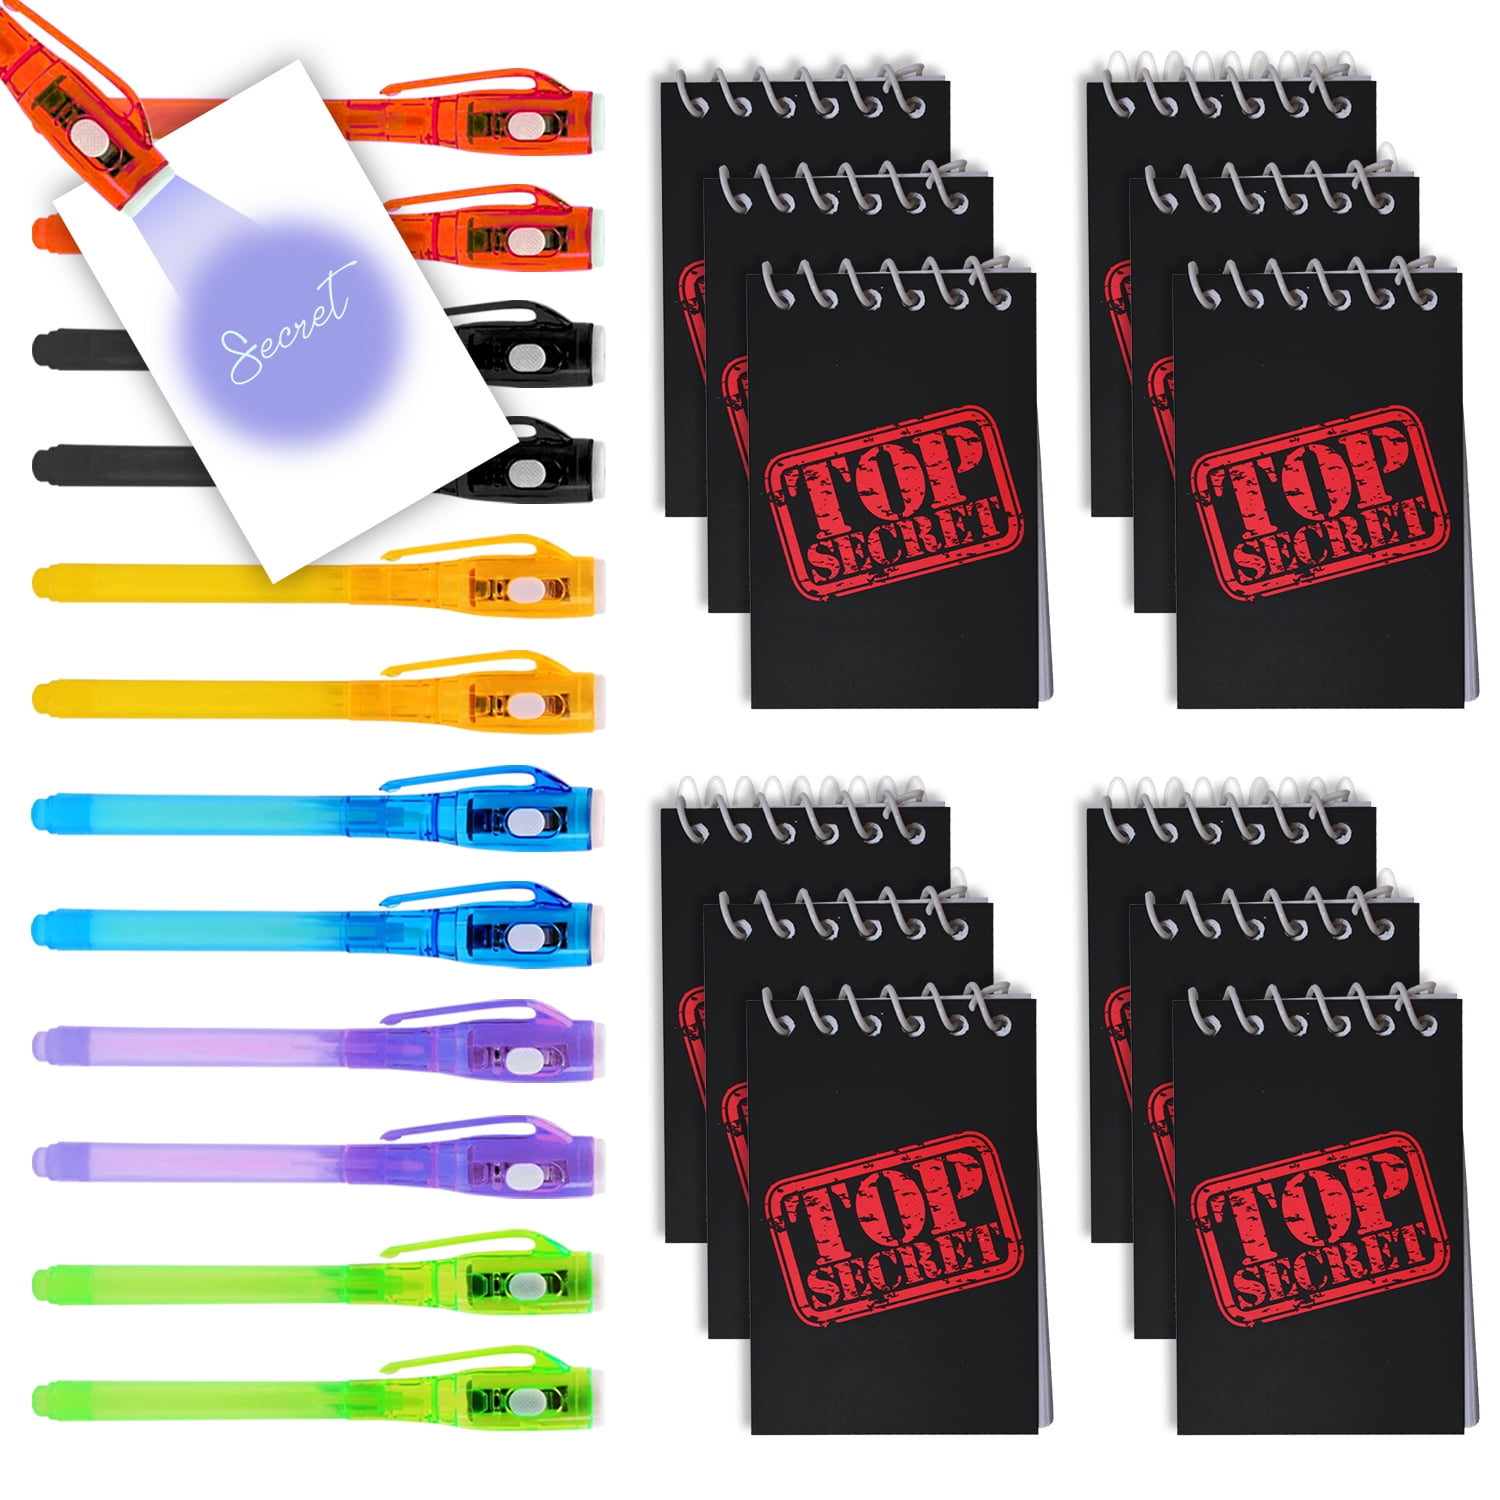 Paw Invisible Ink Pen Wuv Light 12 Pack Mini Prism Spiral Notepads 12 Pack - Great for Themed Party Favors, Magic & Spy Parties,Diary, Homework